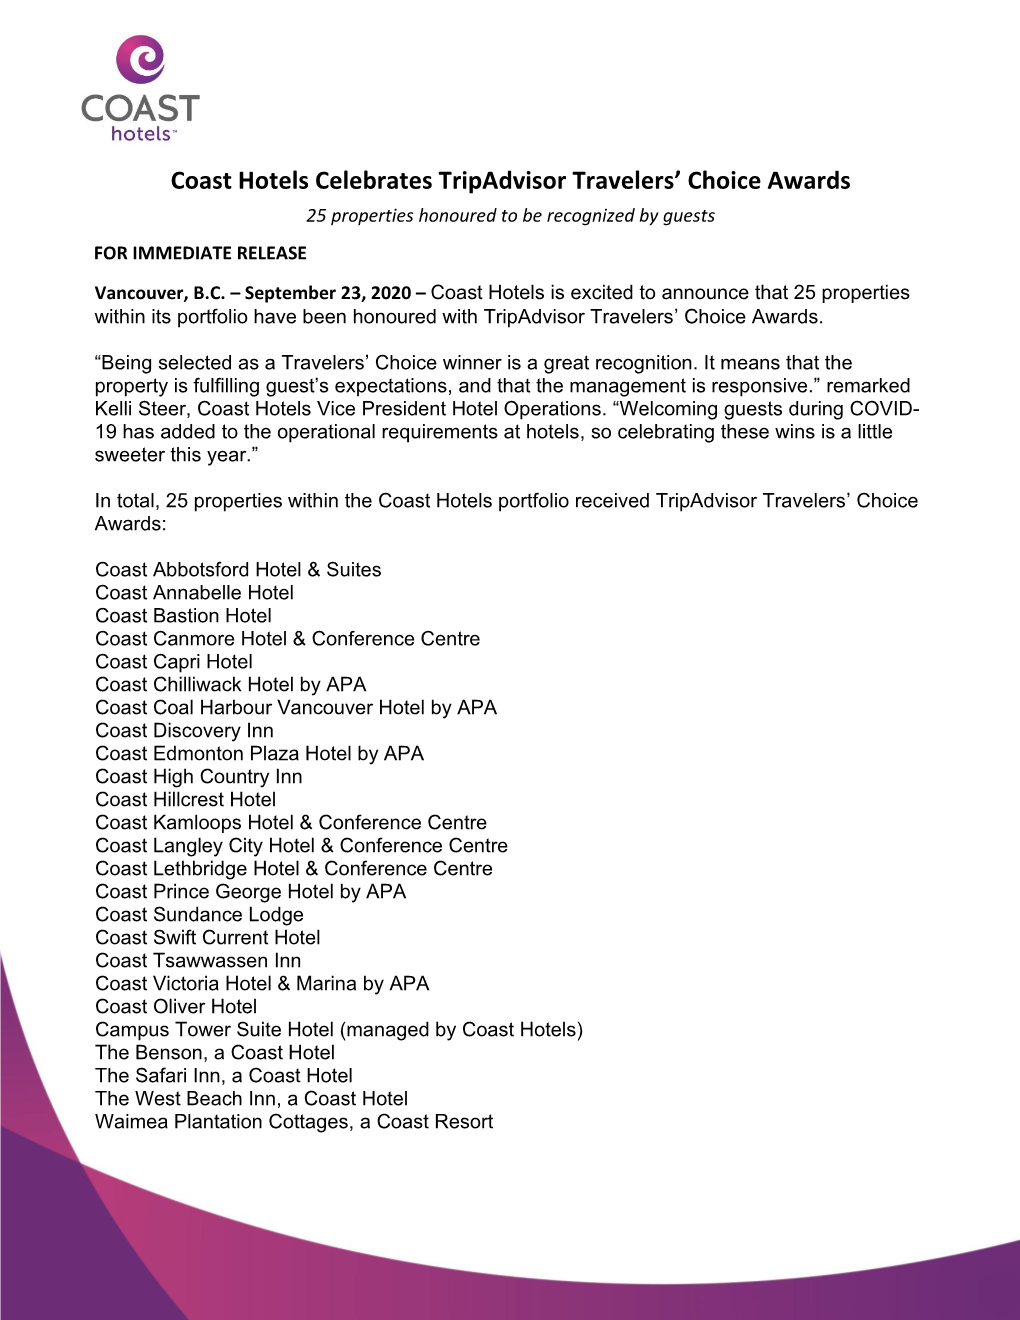 Coast Hotels Celebrates Tripadvisor Travelers’ Choice Awards 25 Properties Honoured to Be Recognized by Guests for IMMEDIATE RELEASE Vancouver, B.C